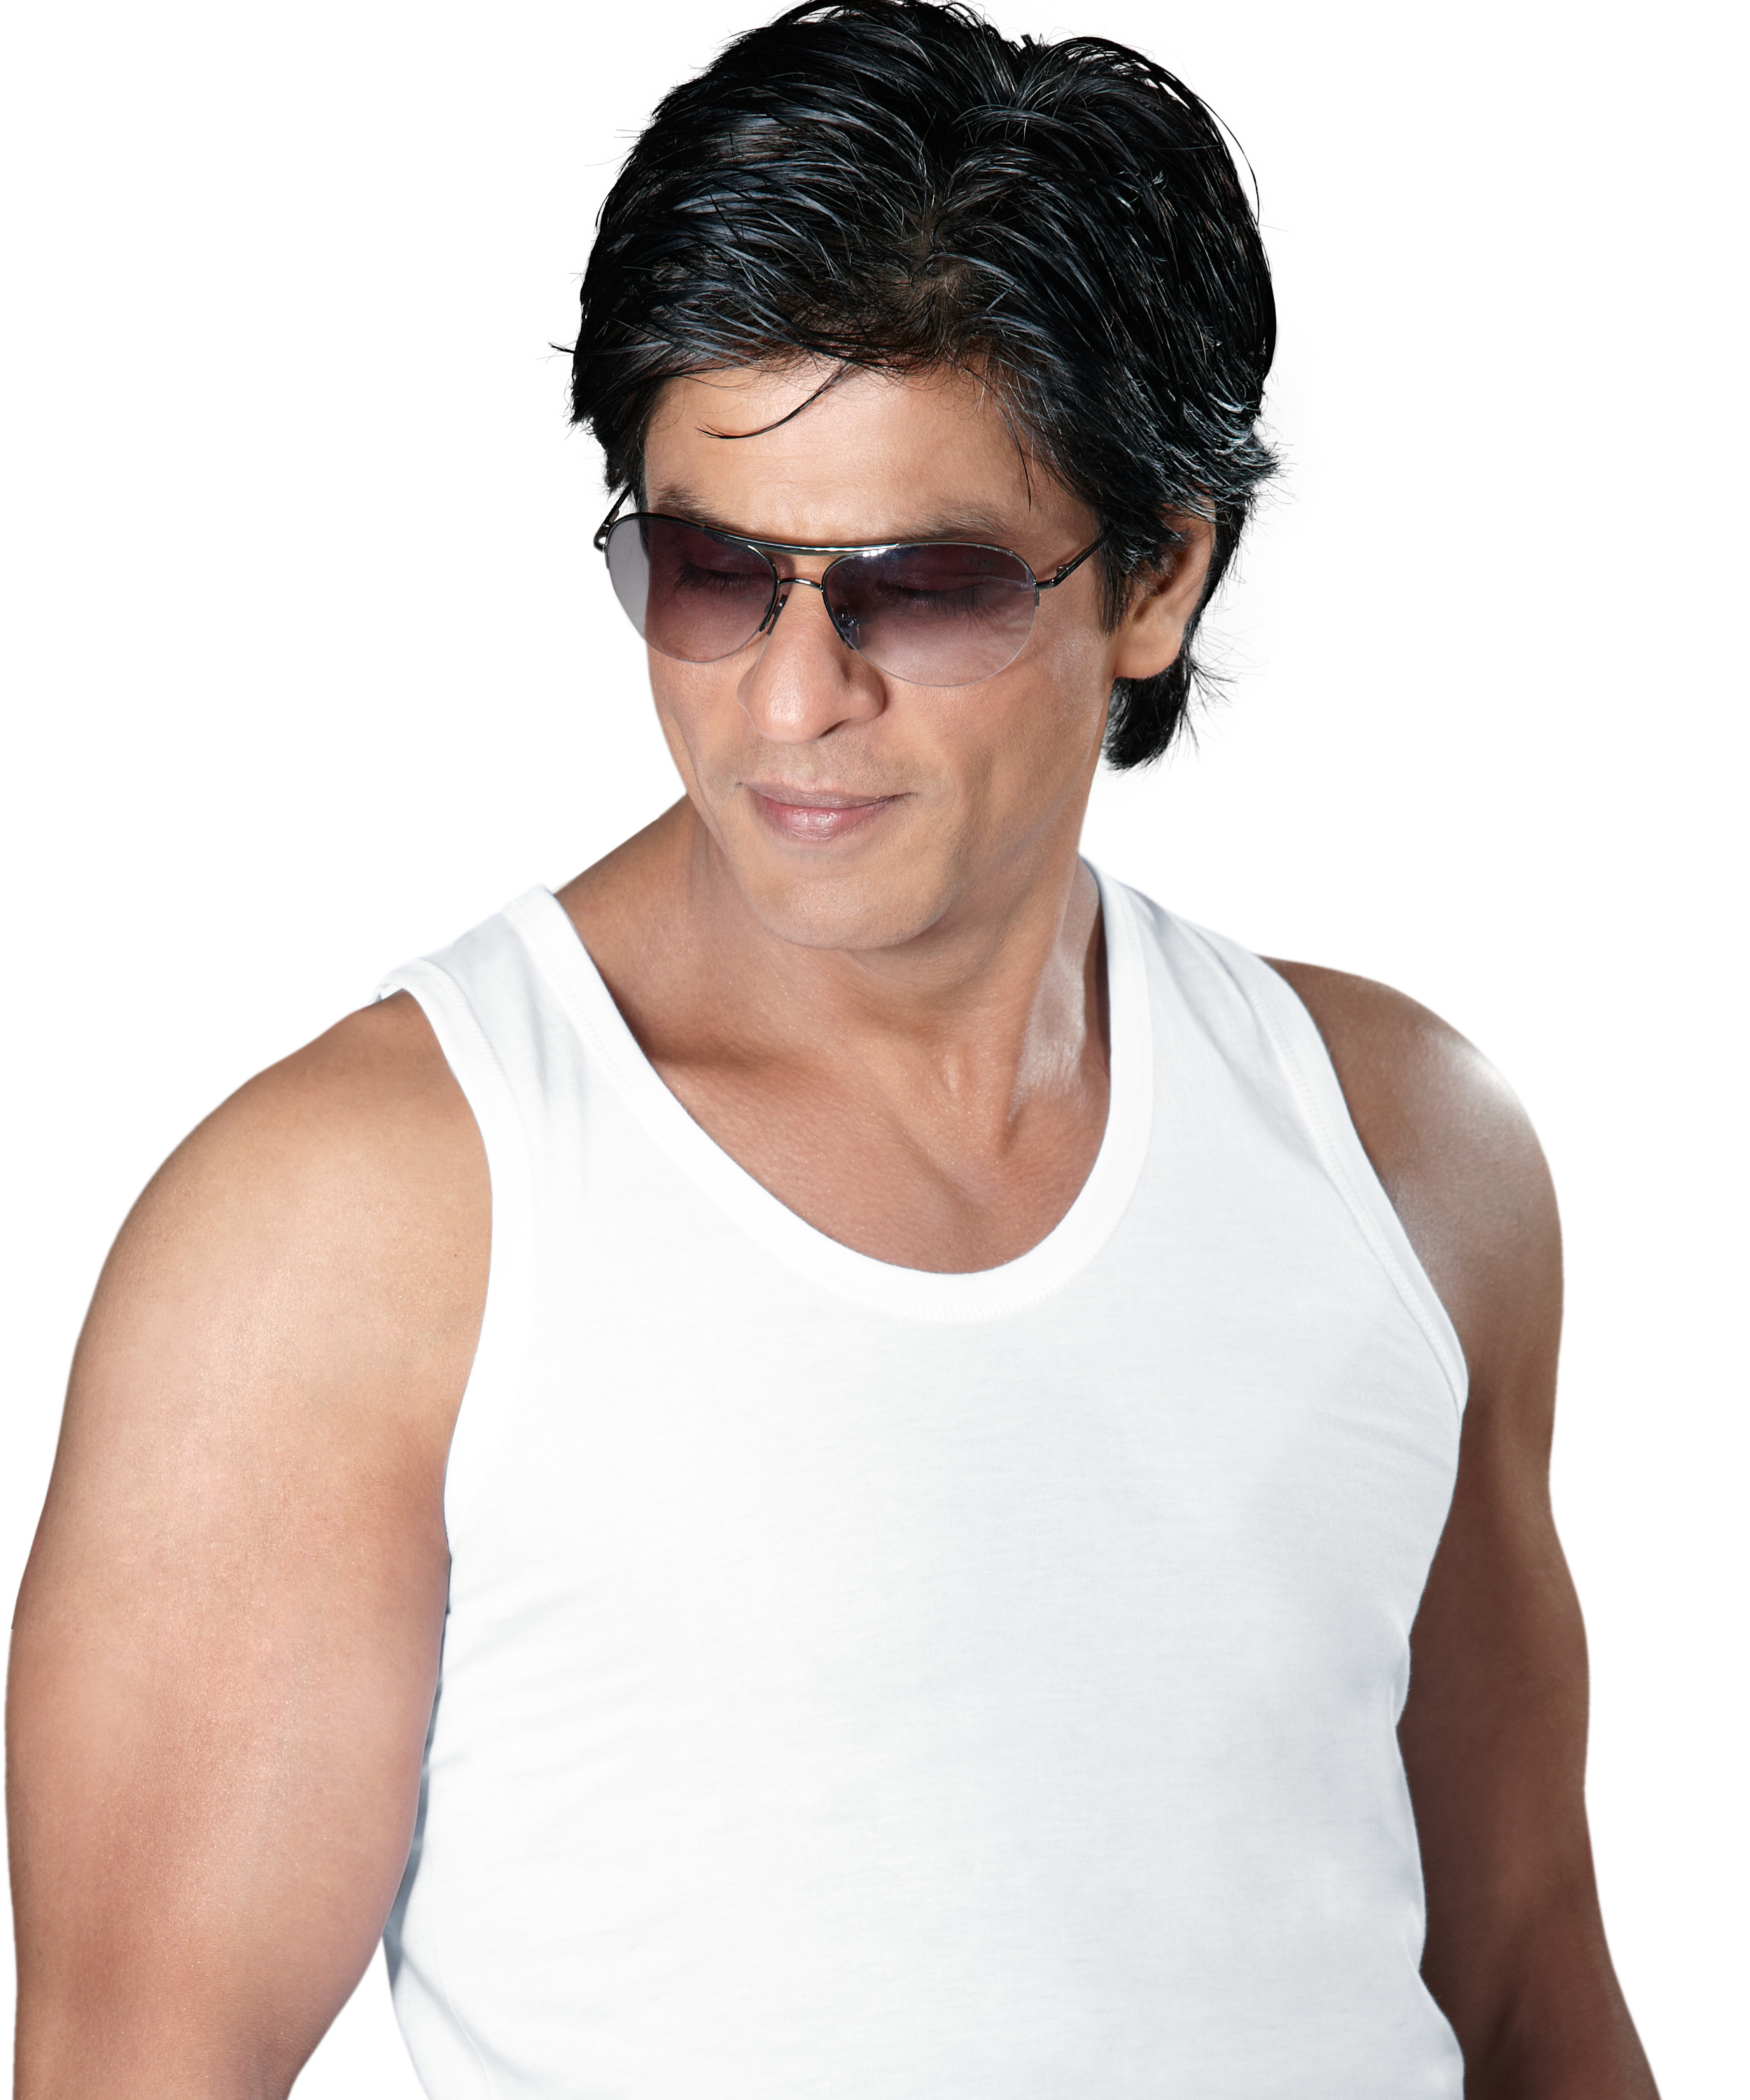 Shahrukh Khan Height in Feet Weight 2016 Body Measurements Chest Biceps Photos